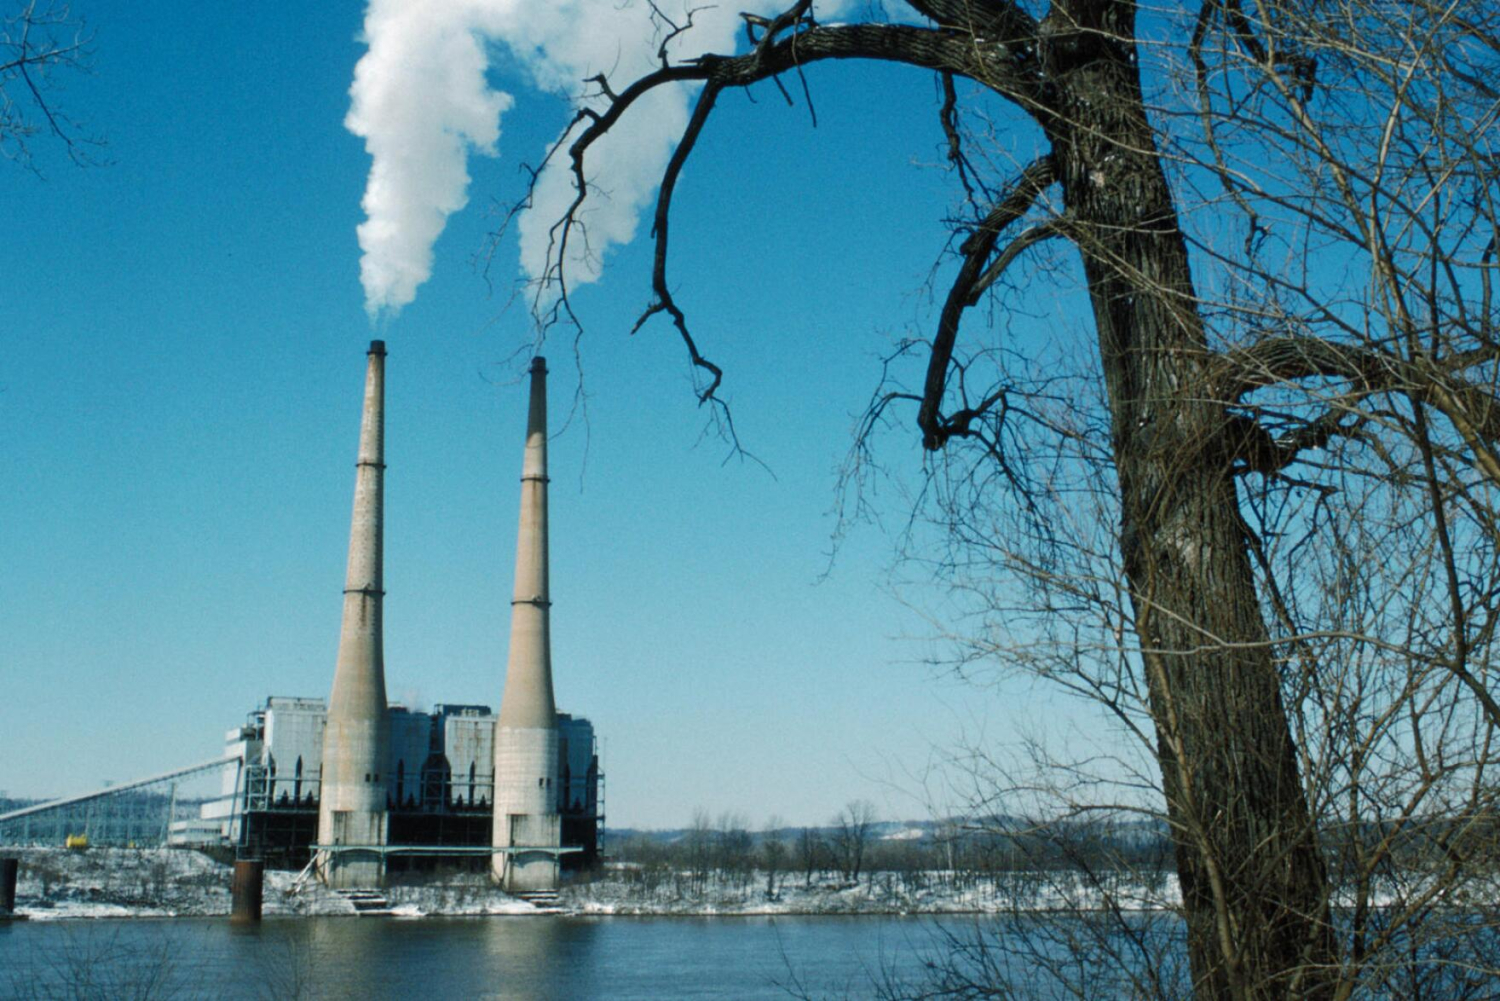 Bill aims to prevent reliability issues when coal plants close early